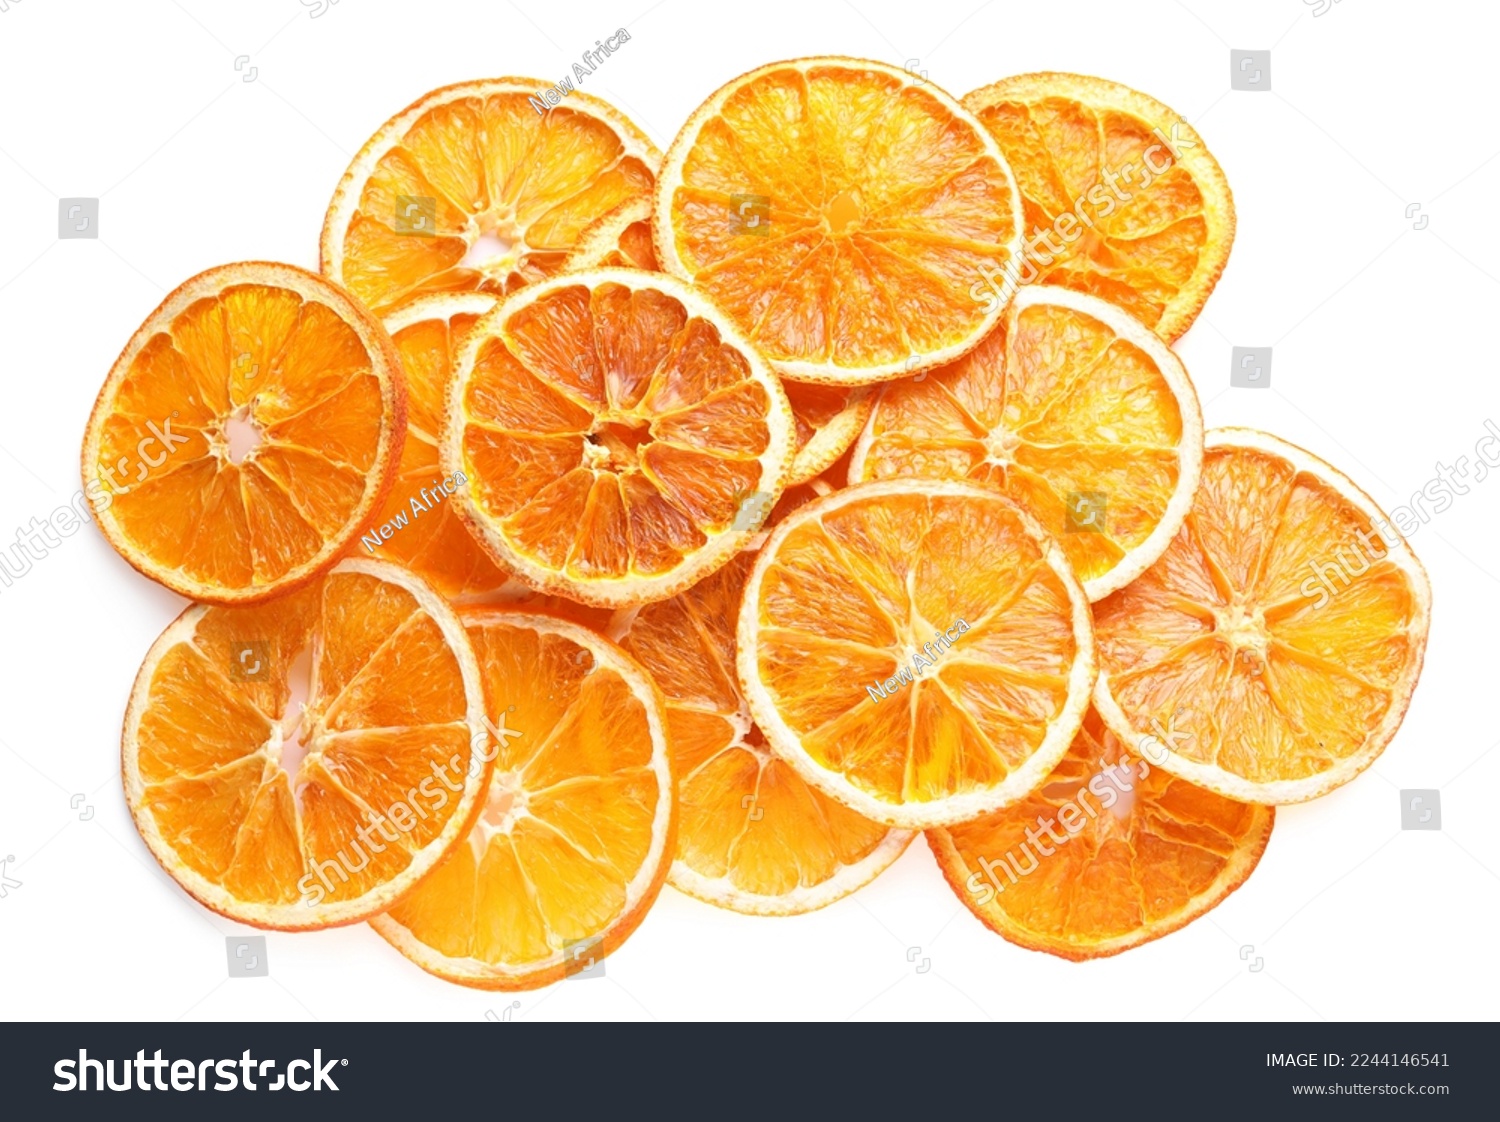 Delicious dry orange slices on white background, top view #2244146541